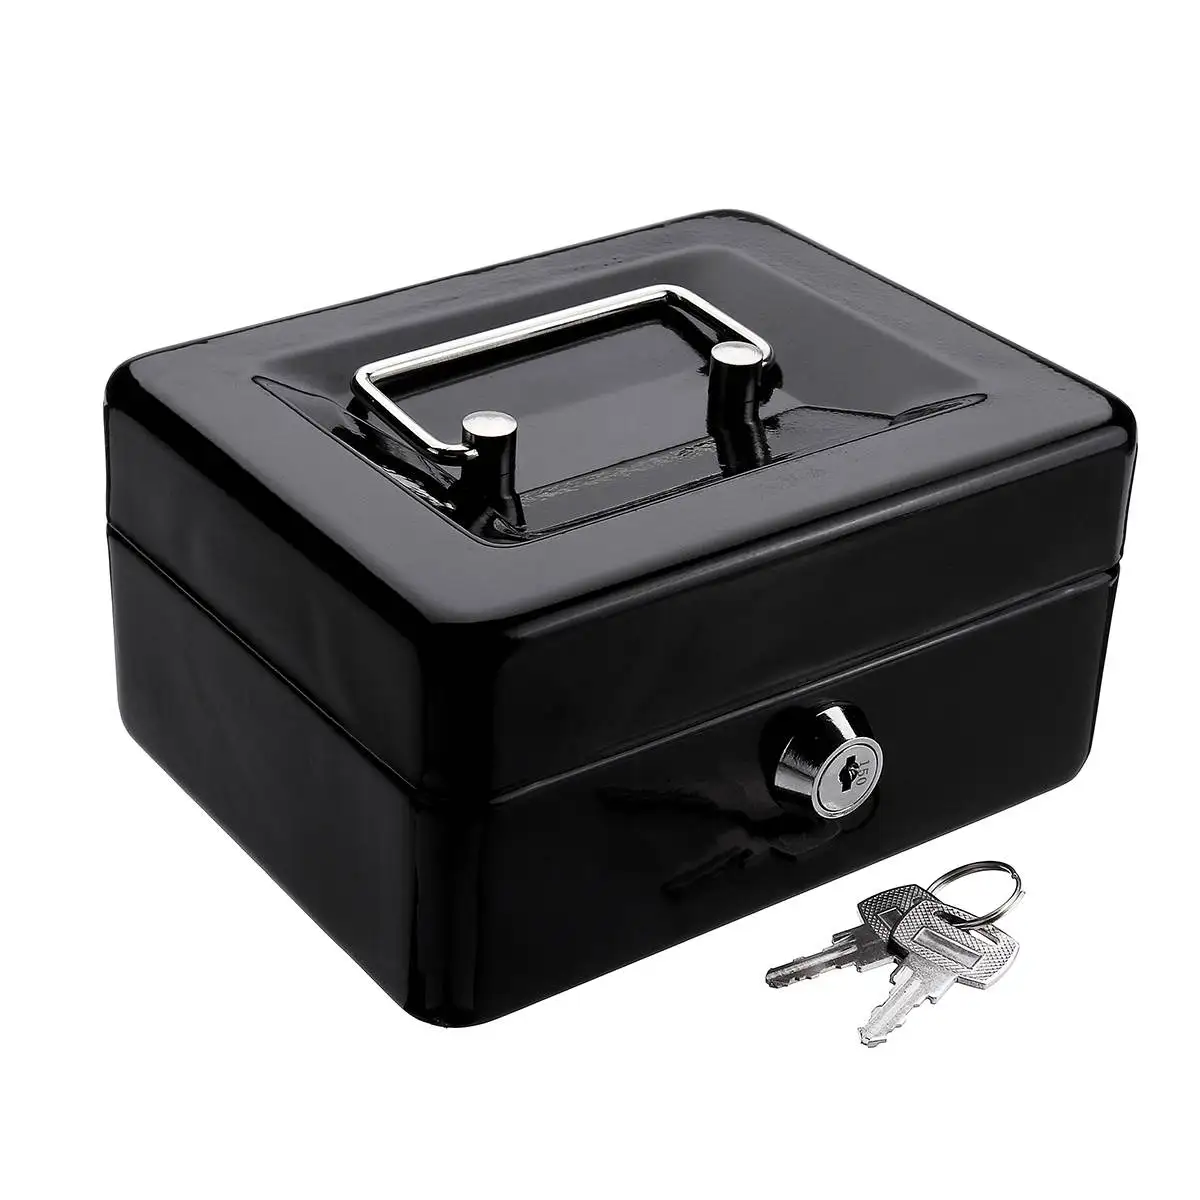 CB0701XLN Black 11.81 x 9.84 x 3.46 inches Jssmst Large Cash Box with Combination Lock Durable Metal Cash Box with Money Tray 